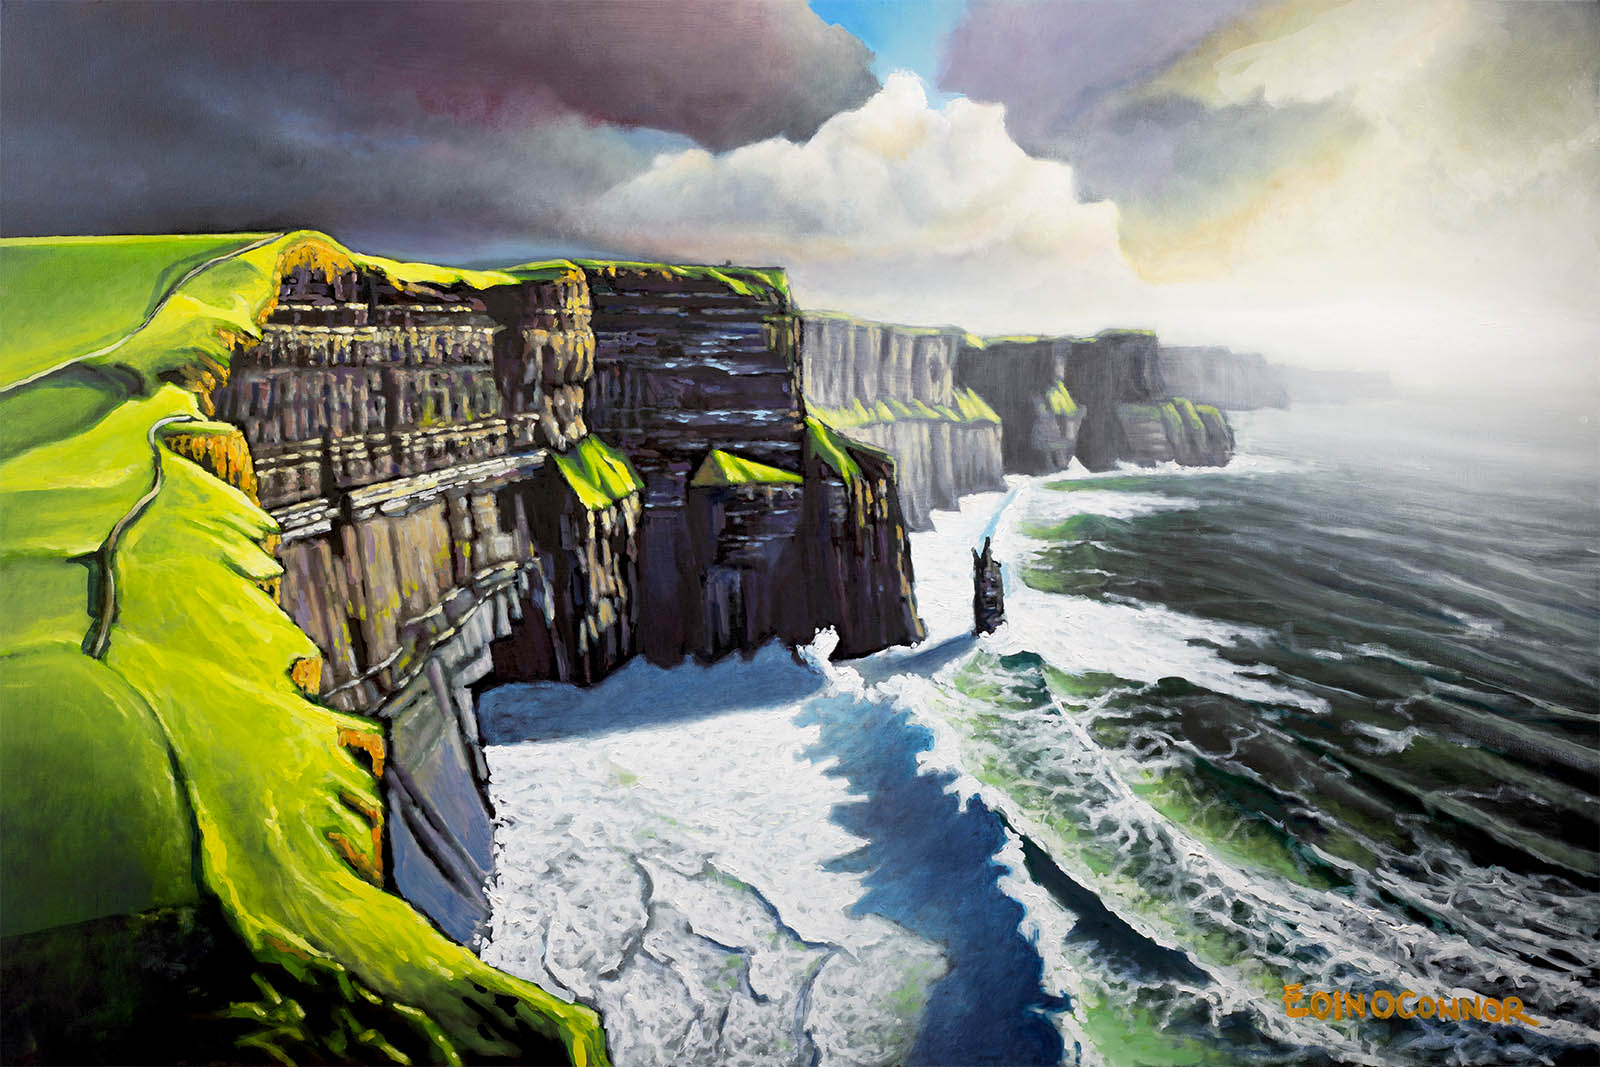 Pillars of Pearl, The Cliffs of Moher